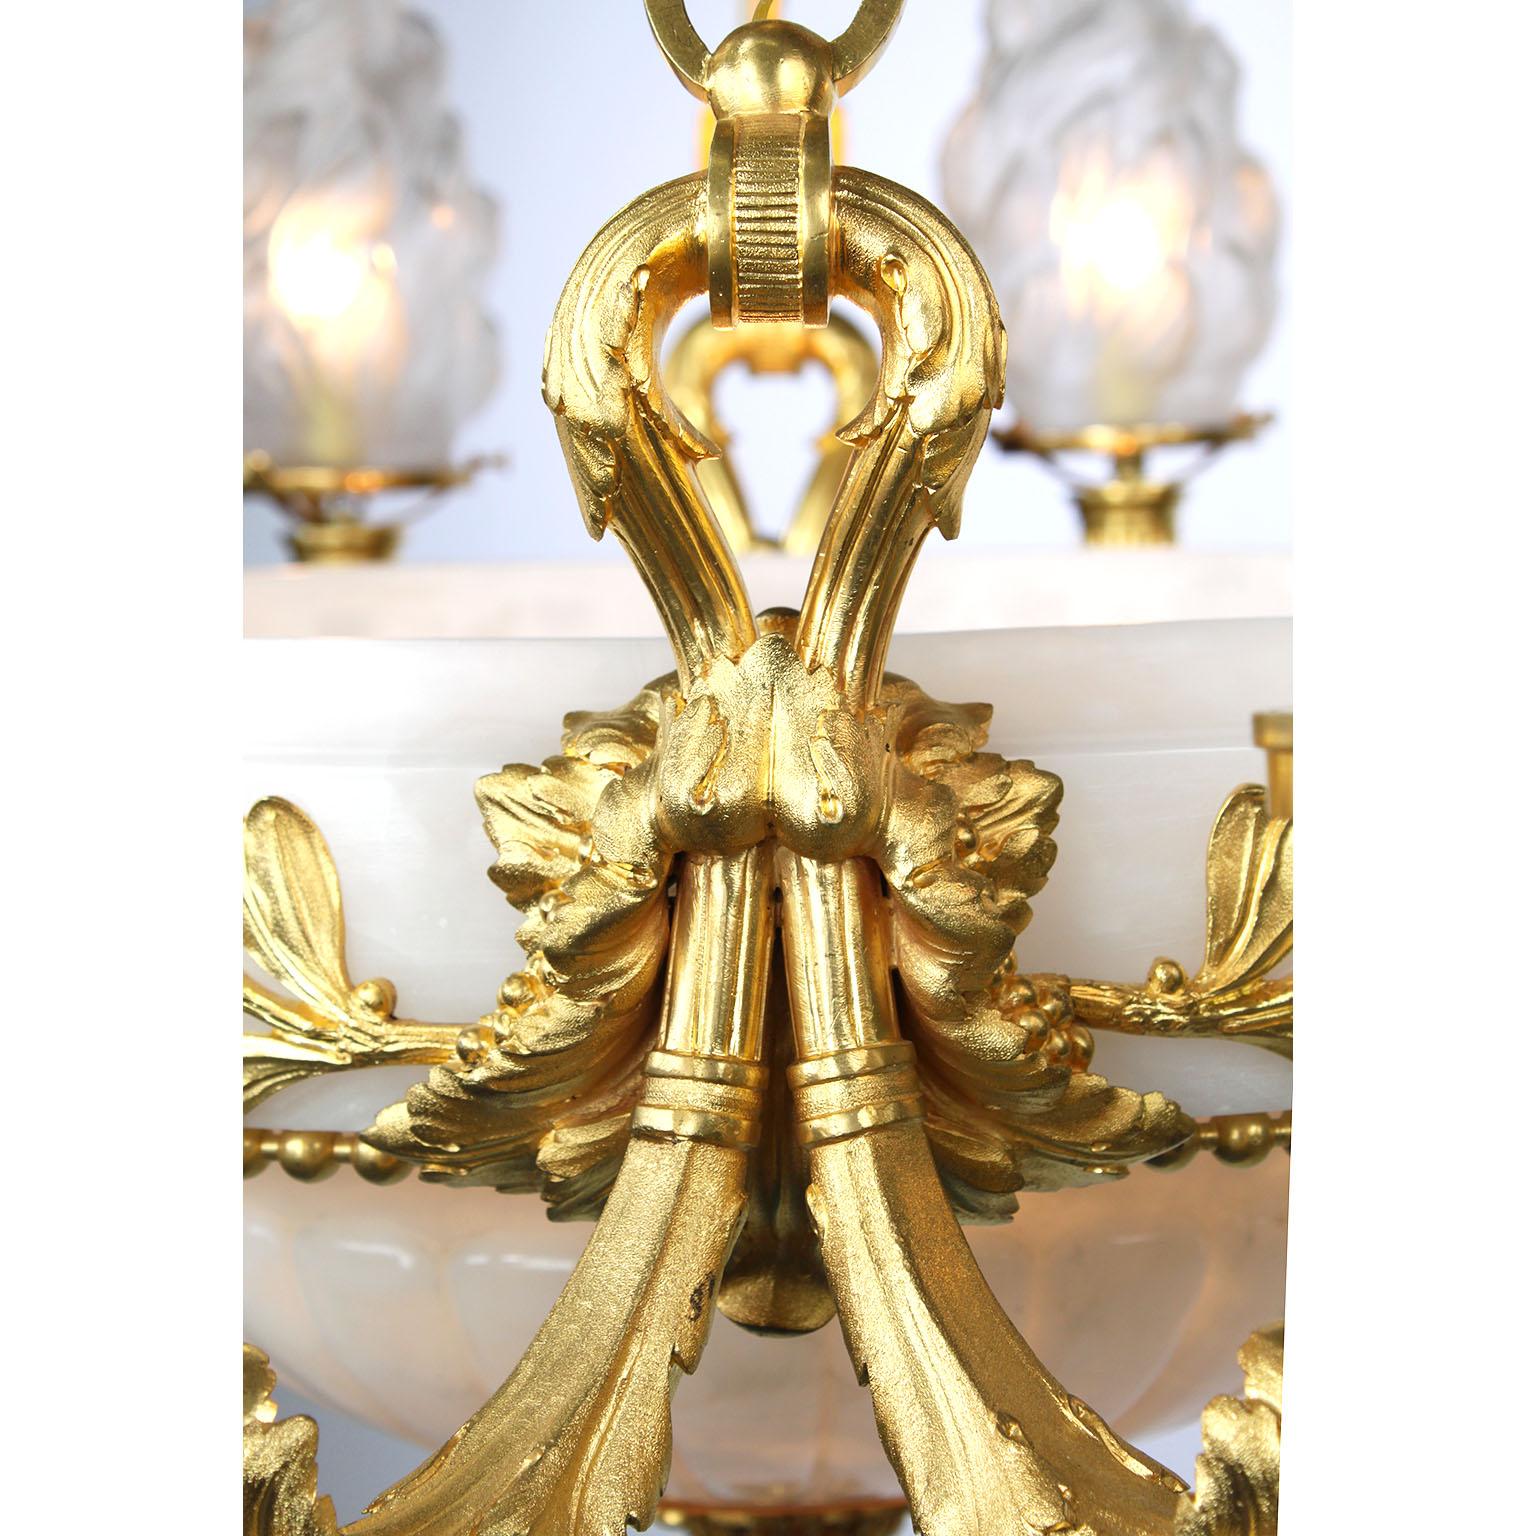 Carved 19th Century Franco-Russian Neoclassical Style Ormolu & Alabaster Chandelier For Sale